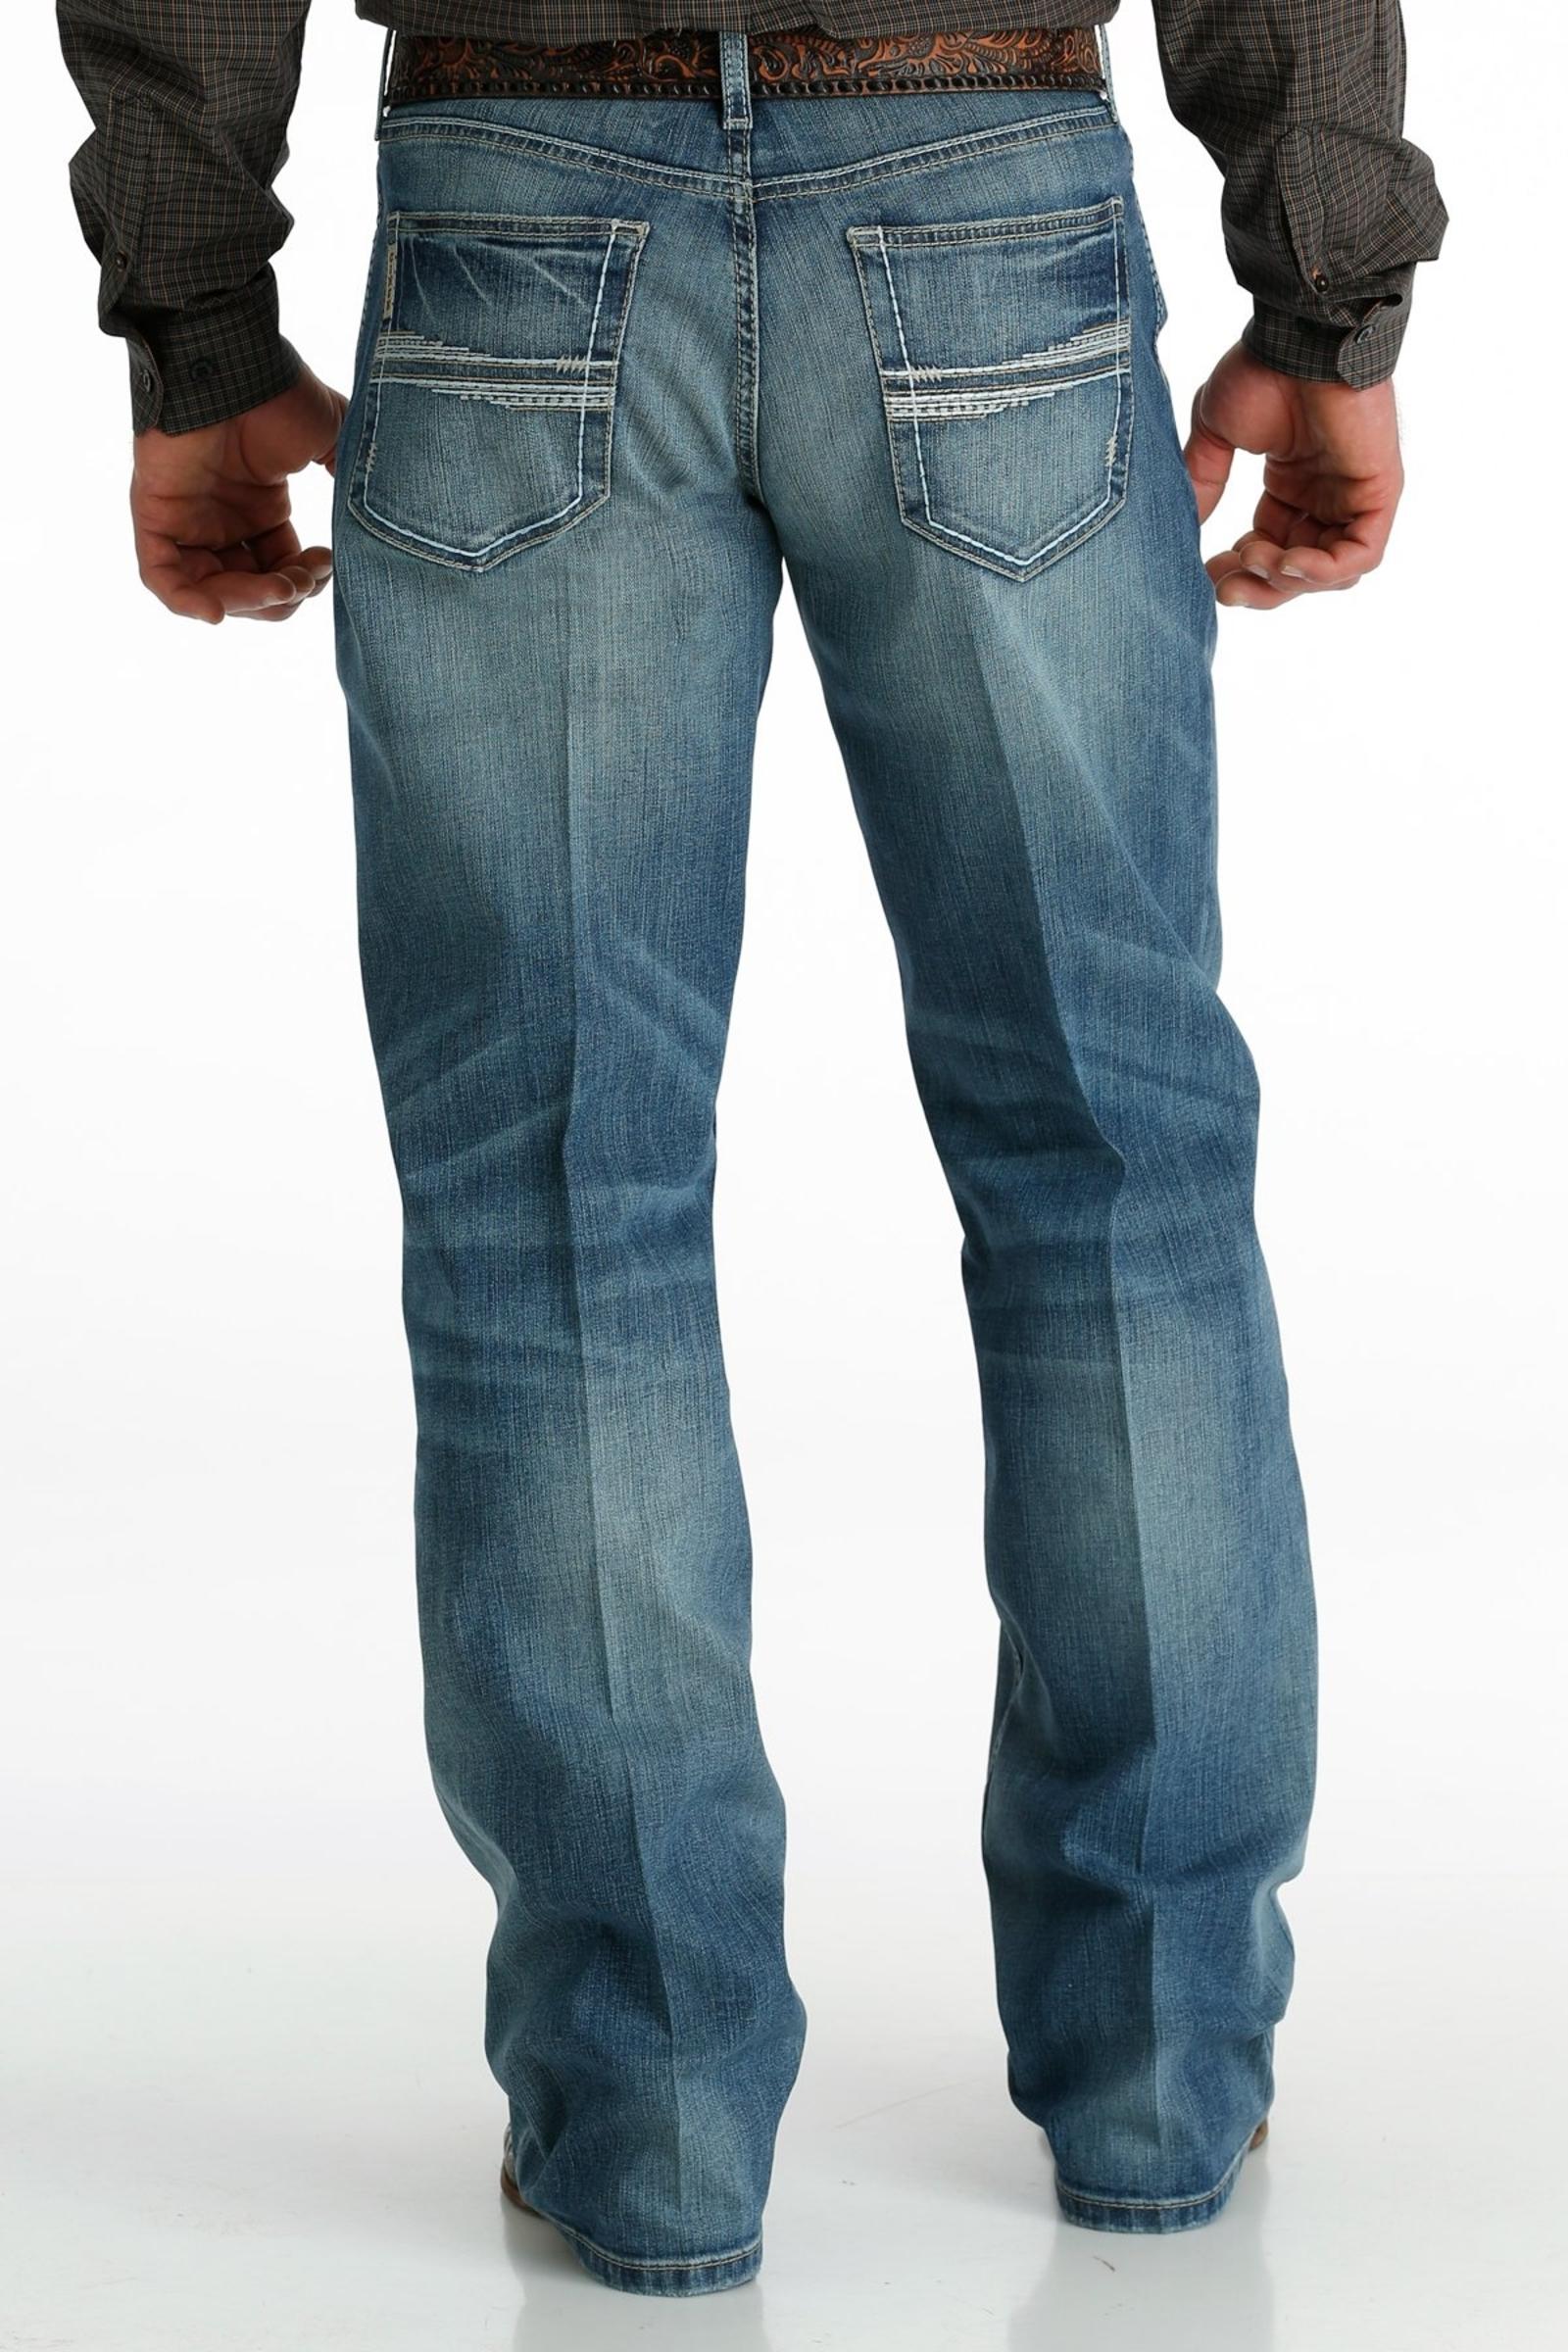 Cinch Jeans Men's Relaxed Fit Grant - Medium Stonewash